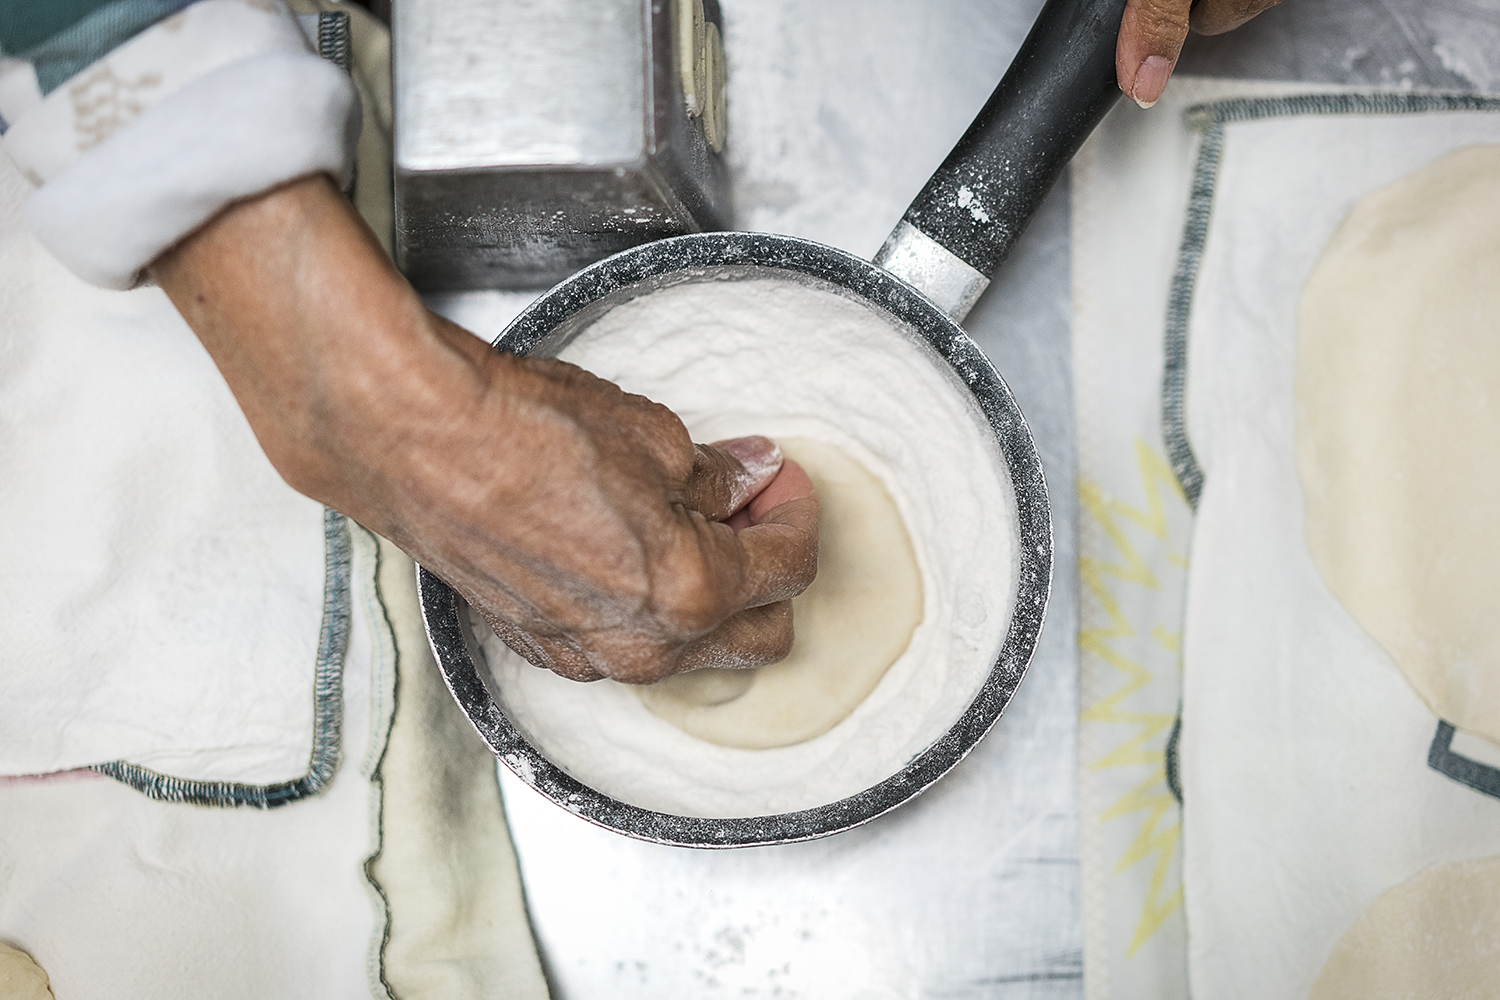 Lupita Vargas, 87, of Flint, gently places masa into a small pot of flour, tapping a couple times each side for a nice, even coat before rolling it out to make a tortilla.